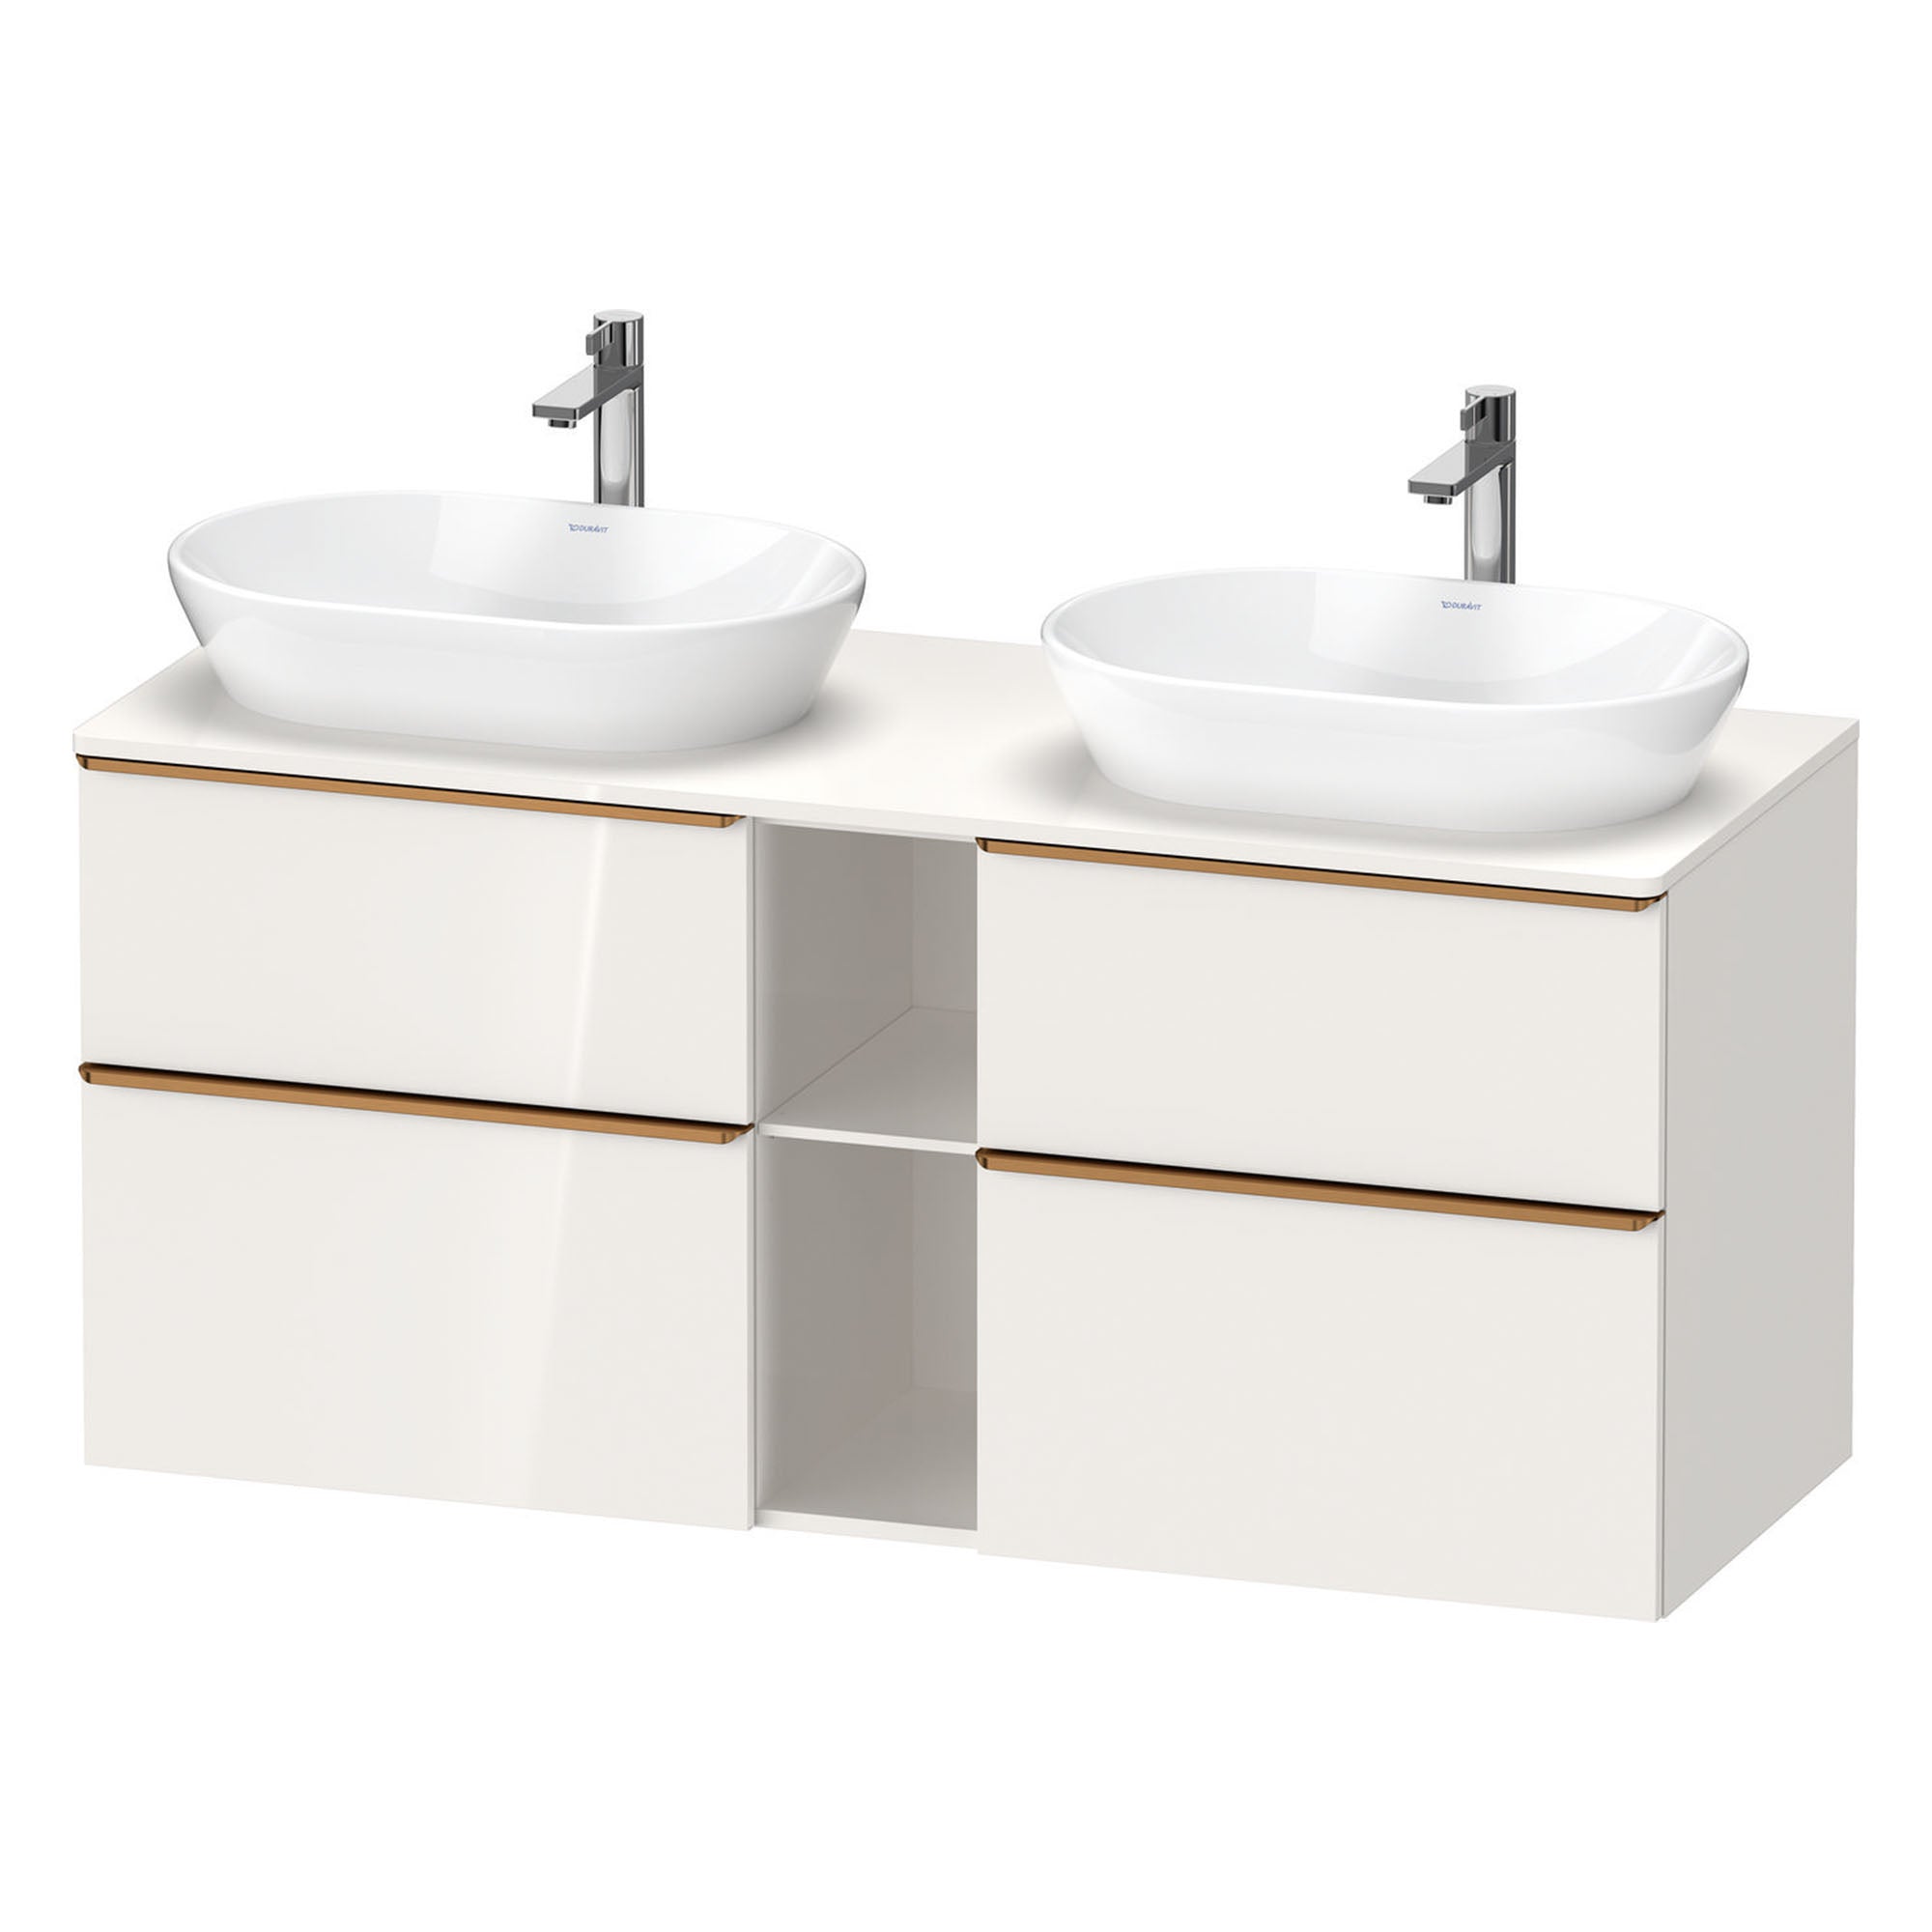 duravit d-neo 1400 wall mounted vanity unit with worktop 2 open shelves white gloss brushed bronze handles